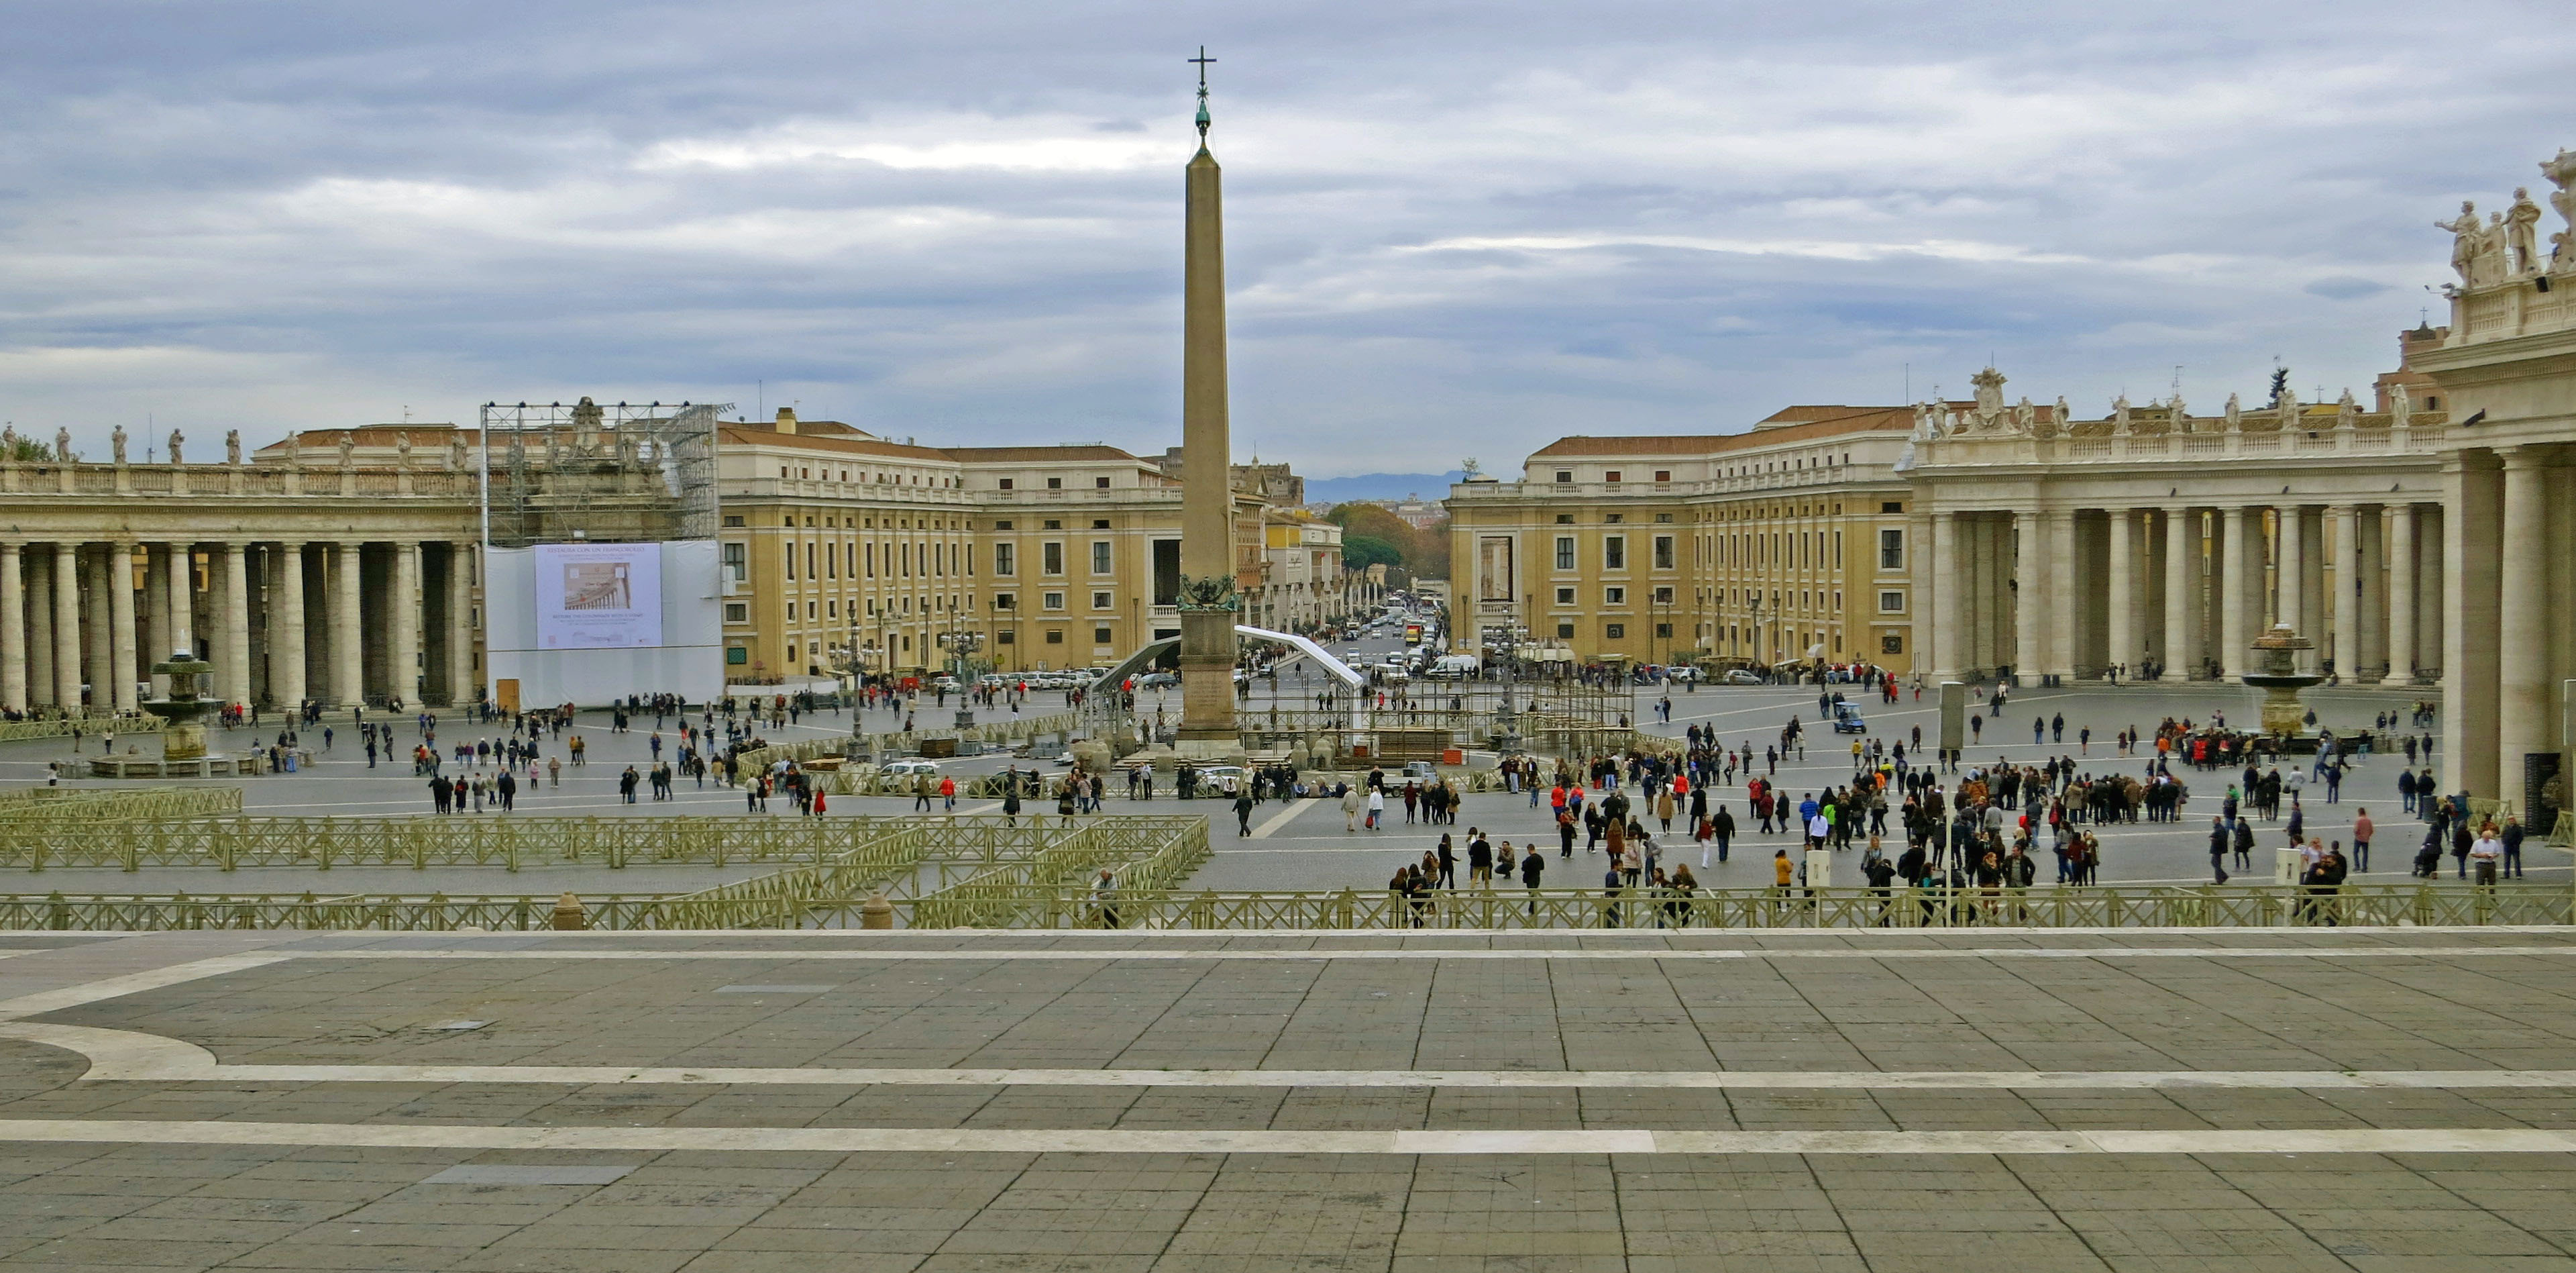 Another perspective of St. Peter's Square. This is taken from the Basilica looking back. The boulevard built my Mussolini is in the distance. Bernini's Colonnade opens out, welcoming the faithful.